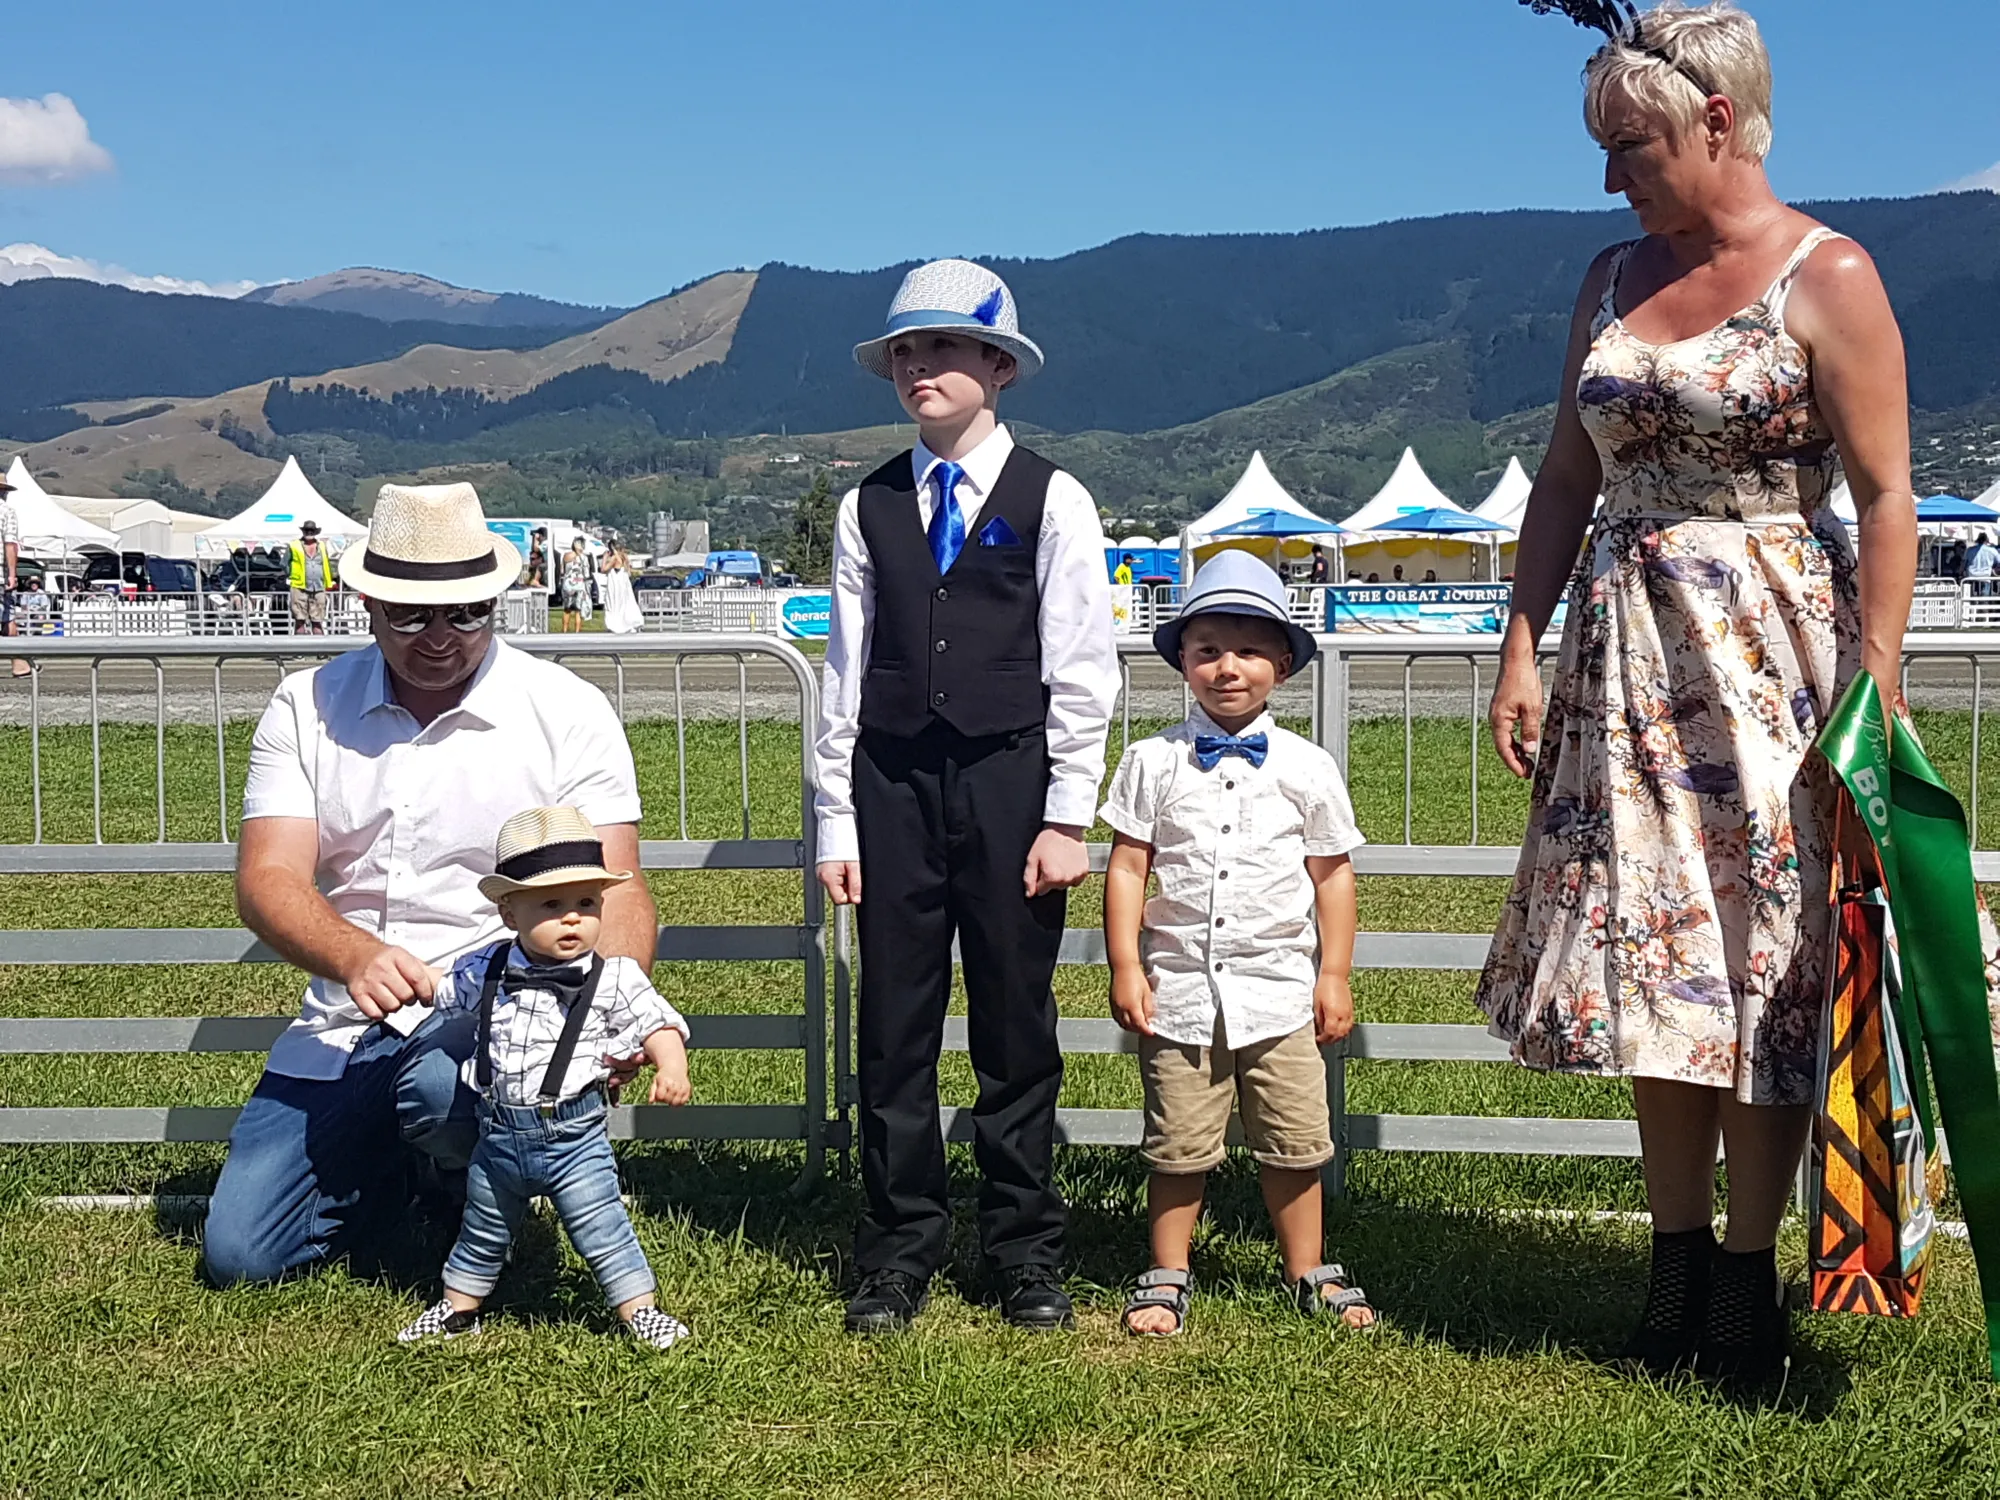 Family fun at the nelson harness races